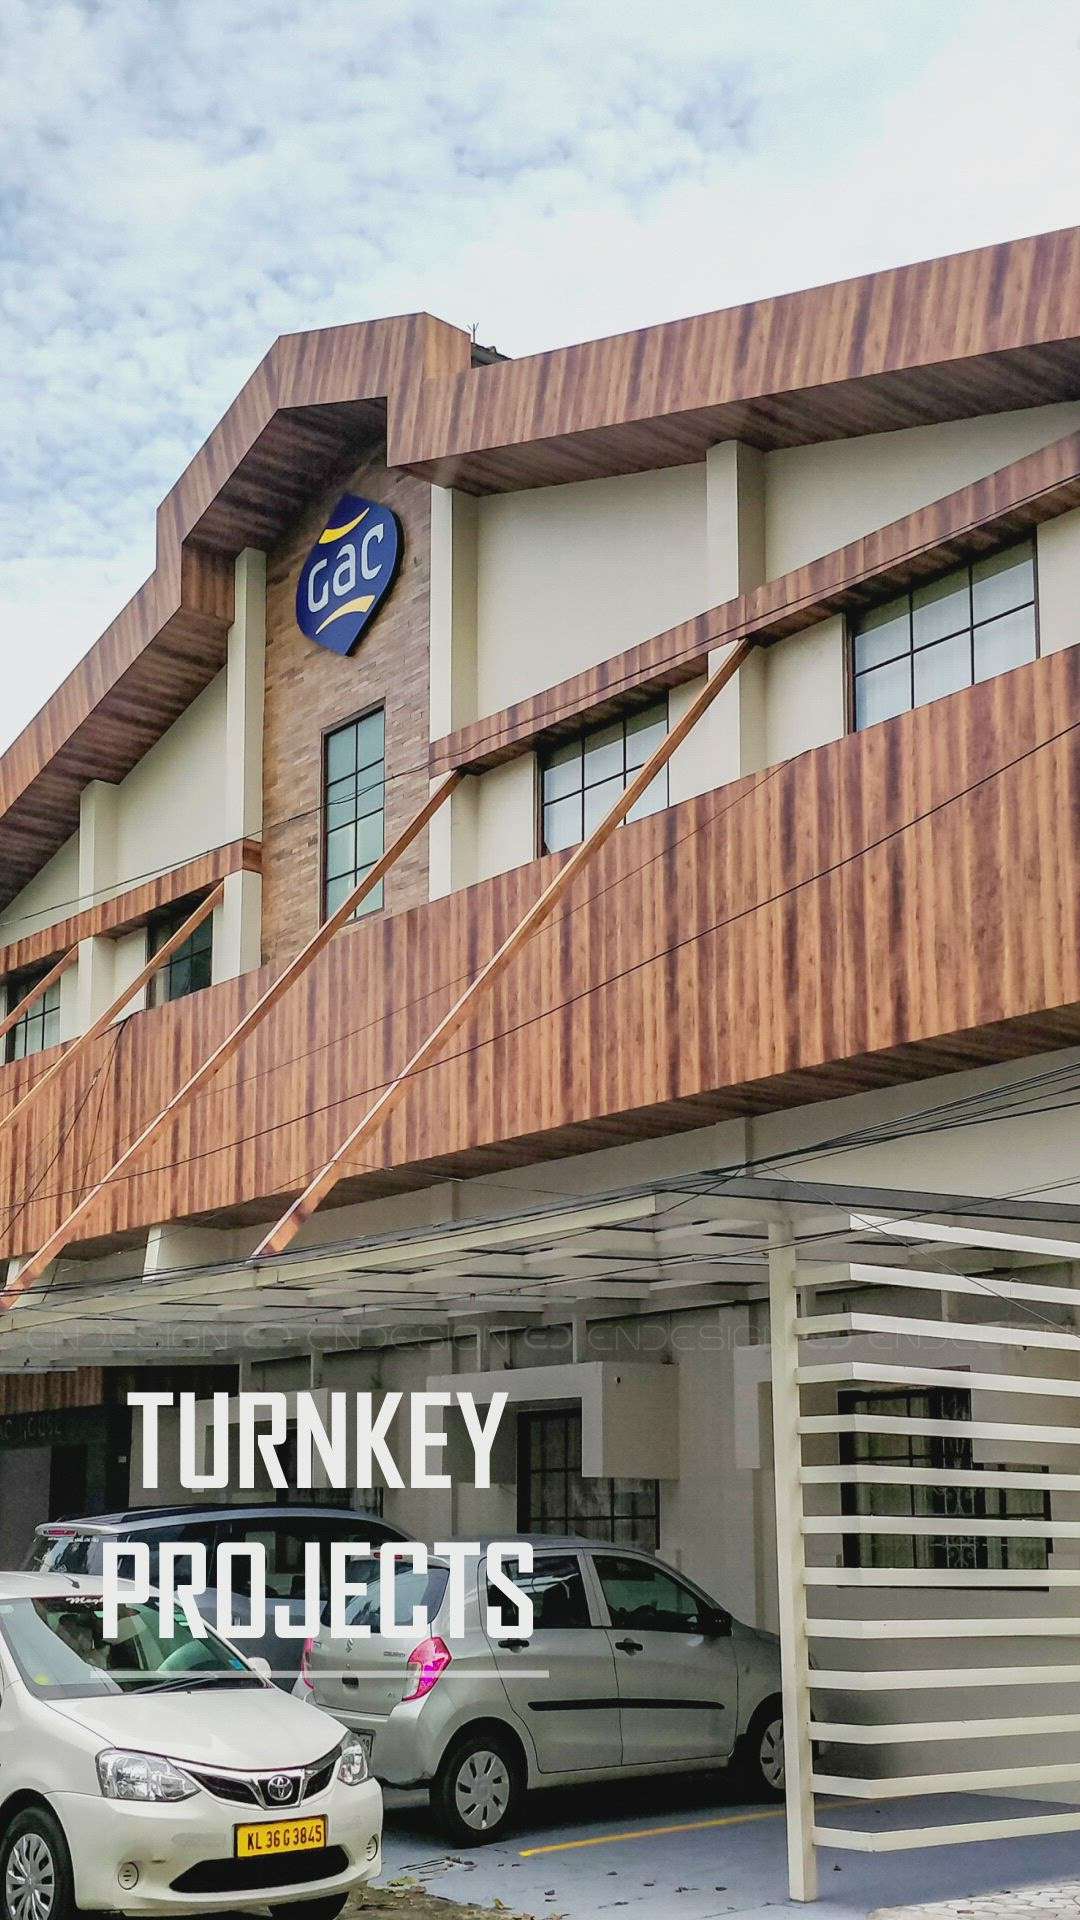 TURNKEY ASSIGNMENT
Client: GAC Shipping (I) Pvt. Ltd.
#turnkeyProjects #commercial #InteriorDesigner  #Architect #exteriordesigns